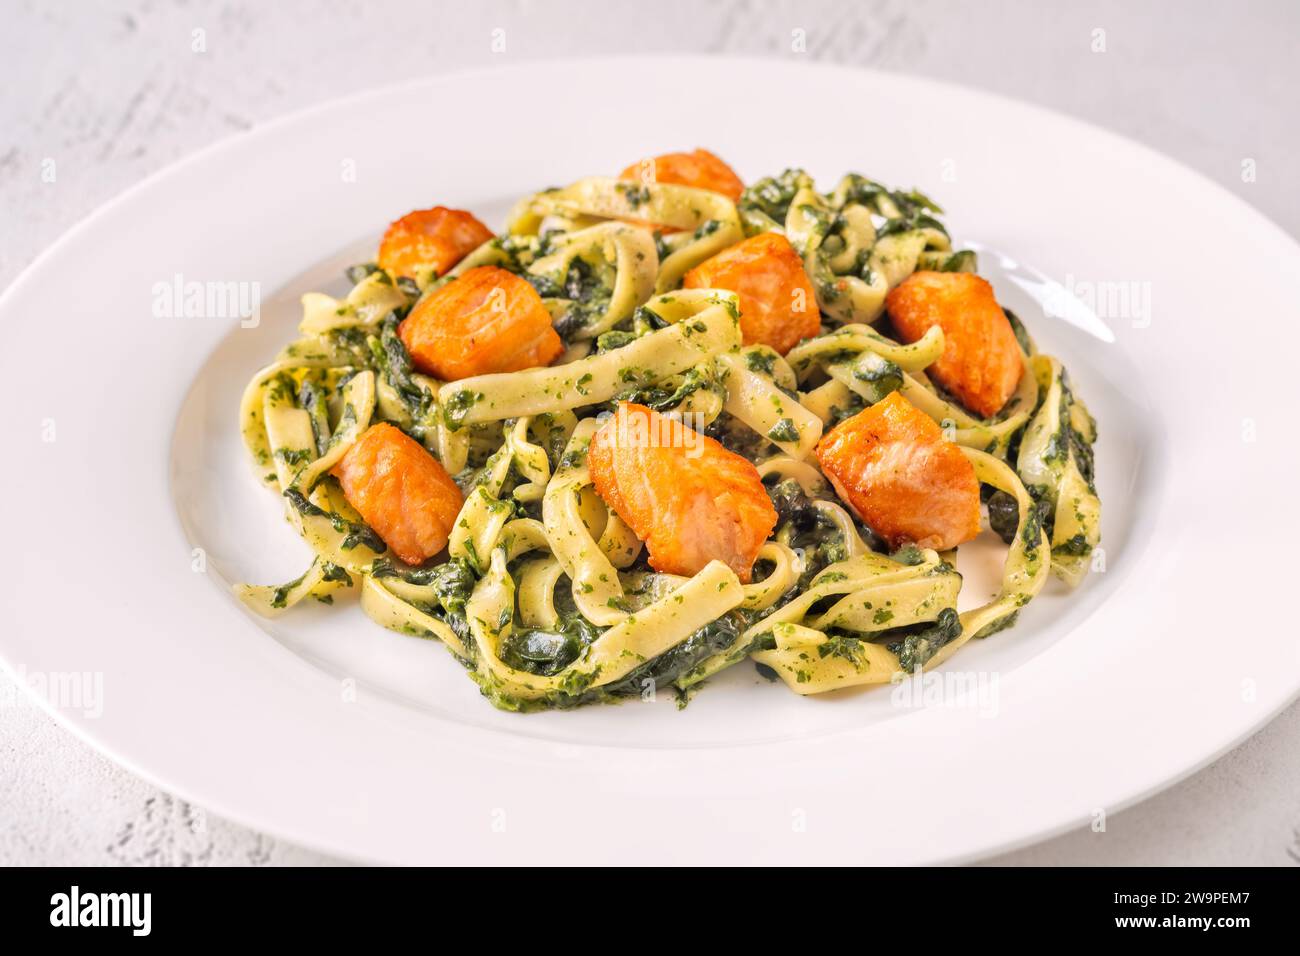 Portion of creamy spinach pasta with salmon Stock Photo